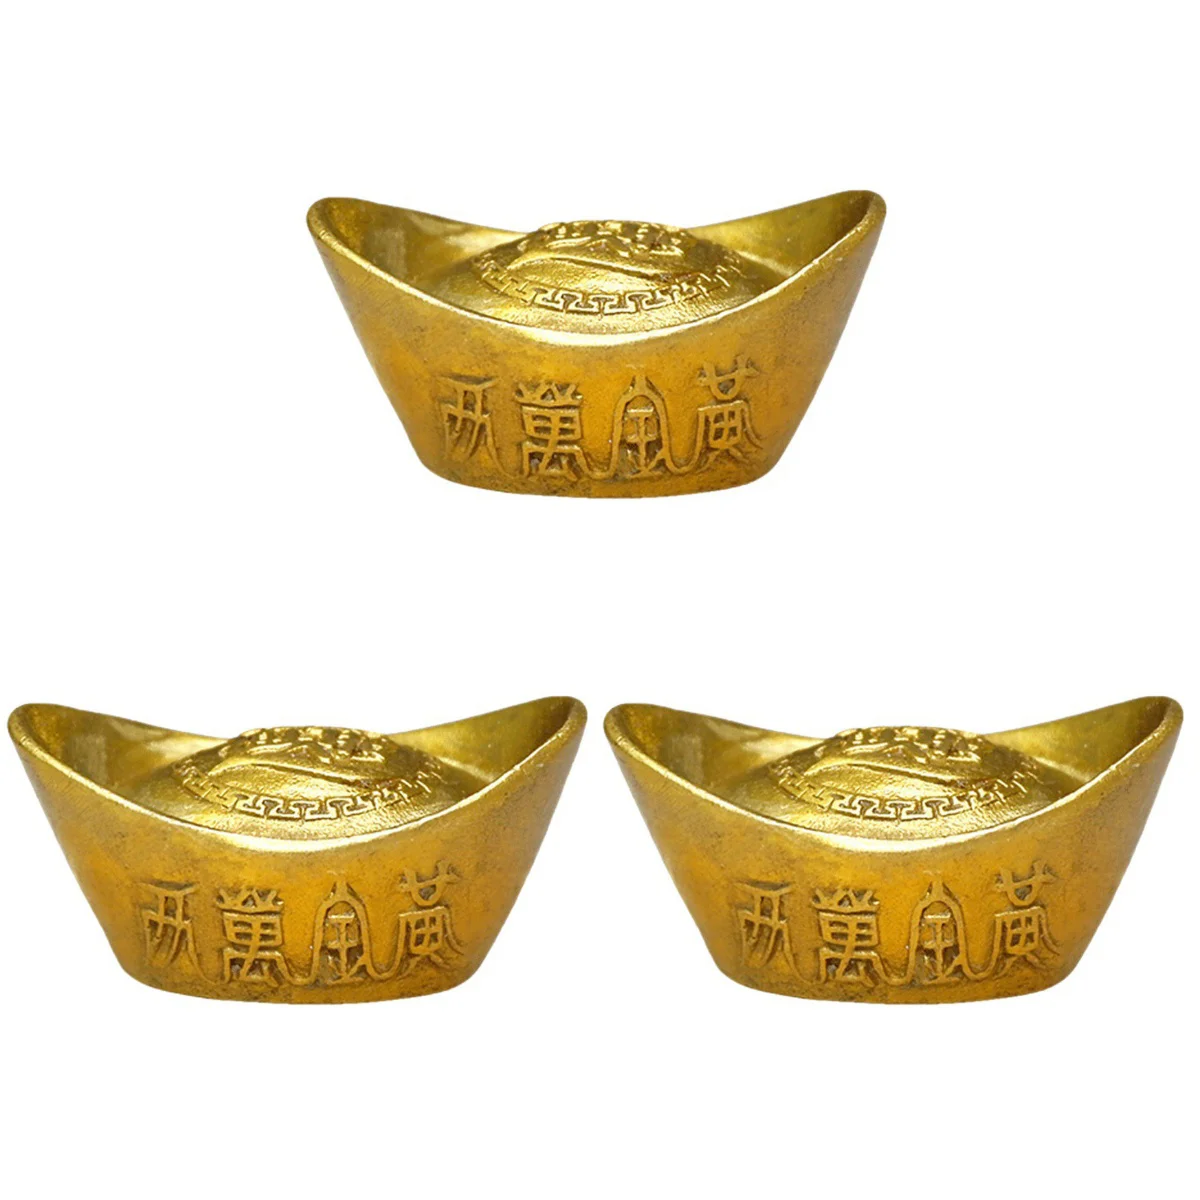 

Ingot Ingots Wealth Money Lucky Chinese Gold Decor Luck Golden Bao Yuan Simulated Tone Shui Feng Ancient Home Fortune Prosperity